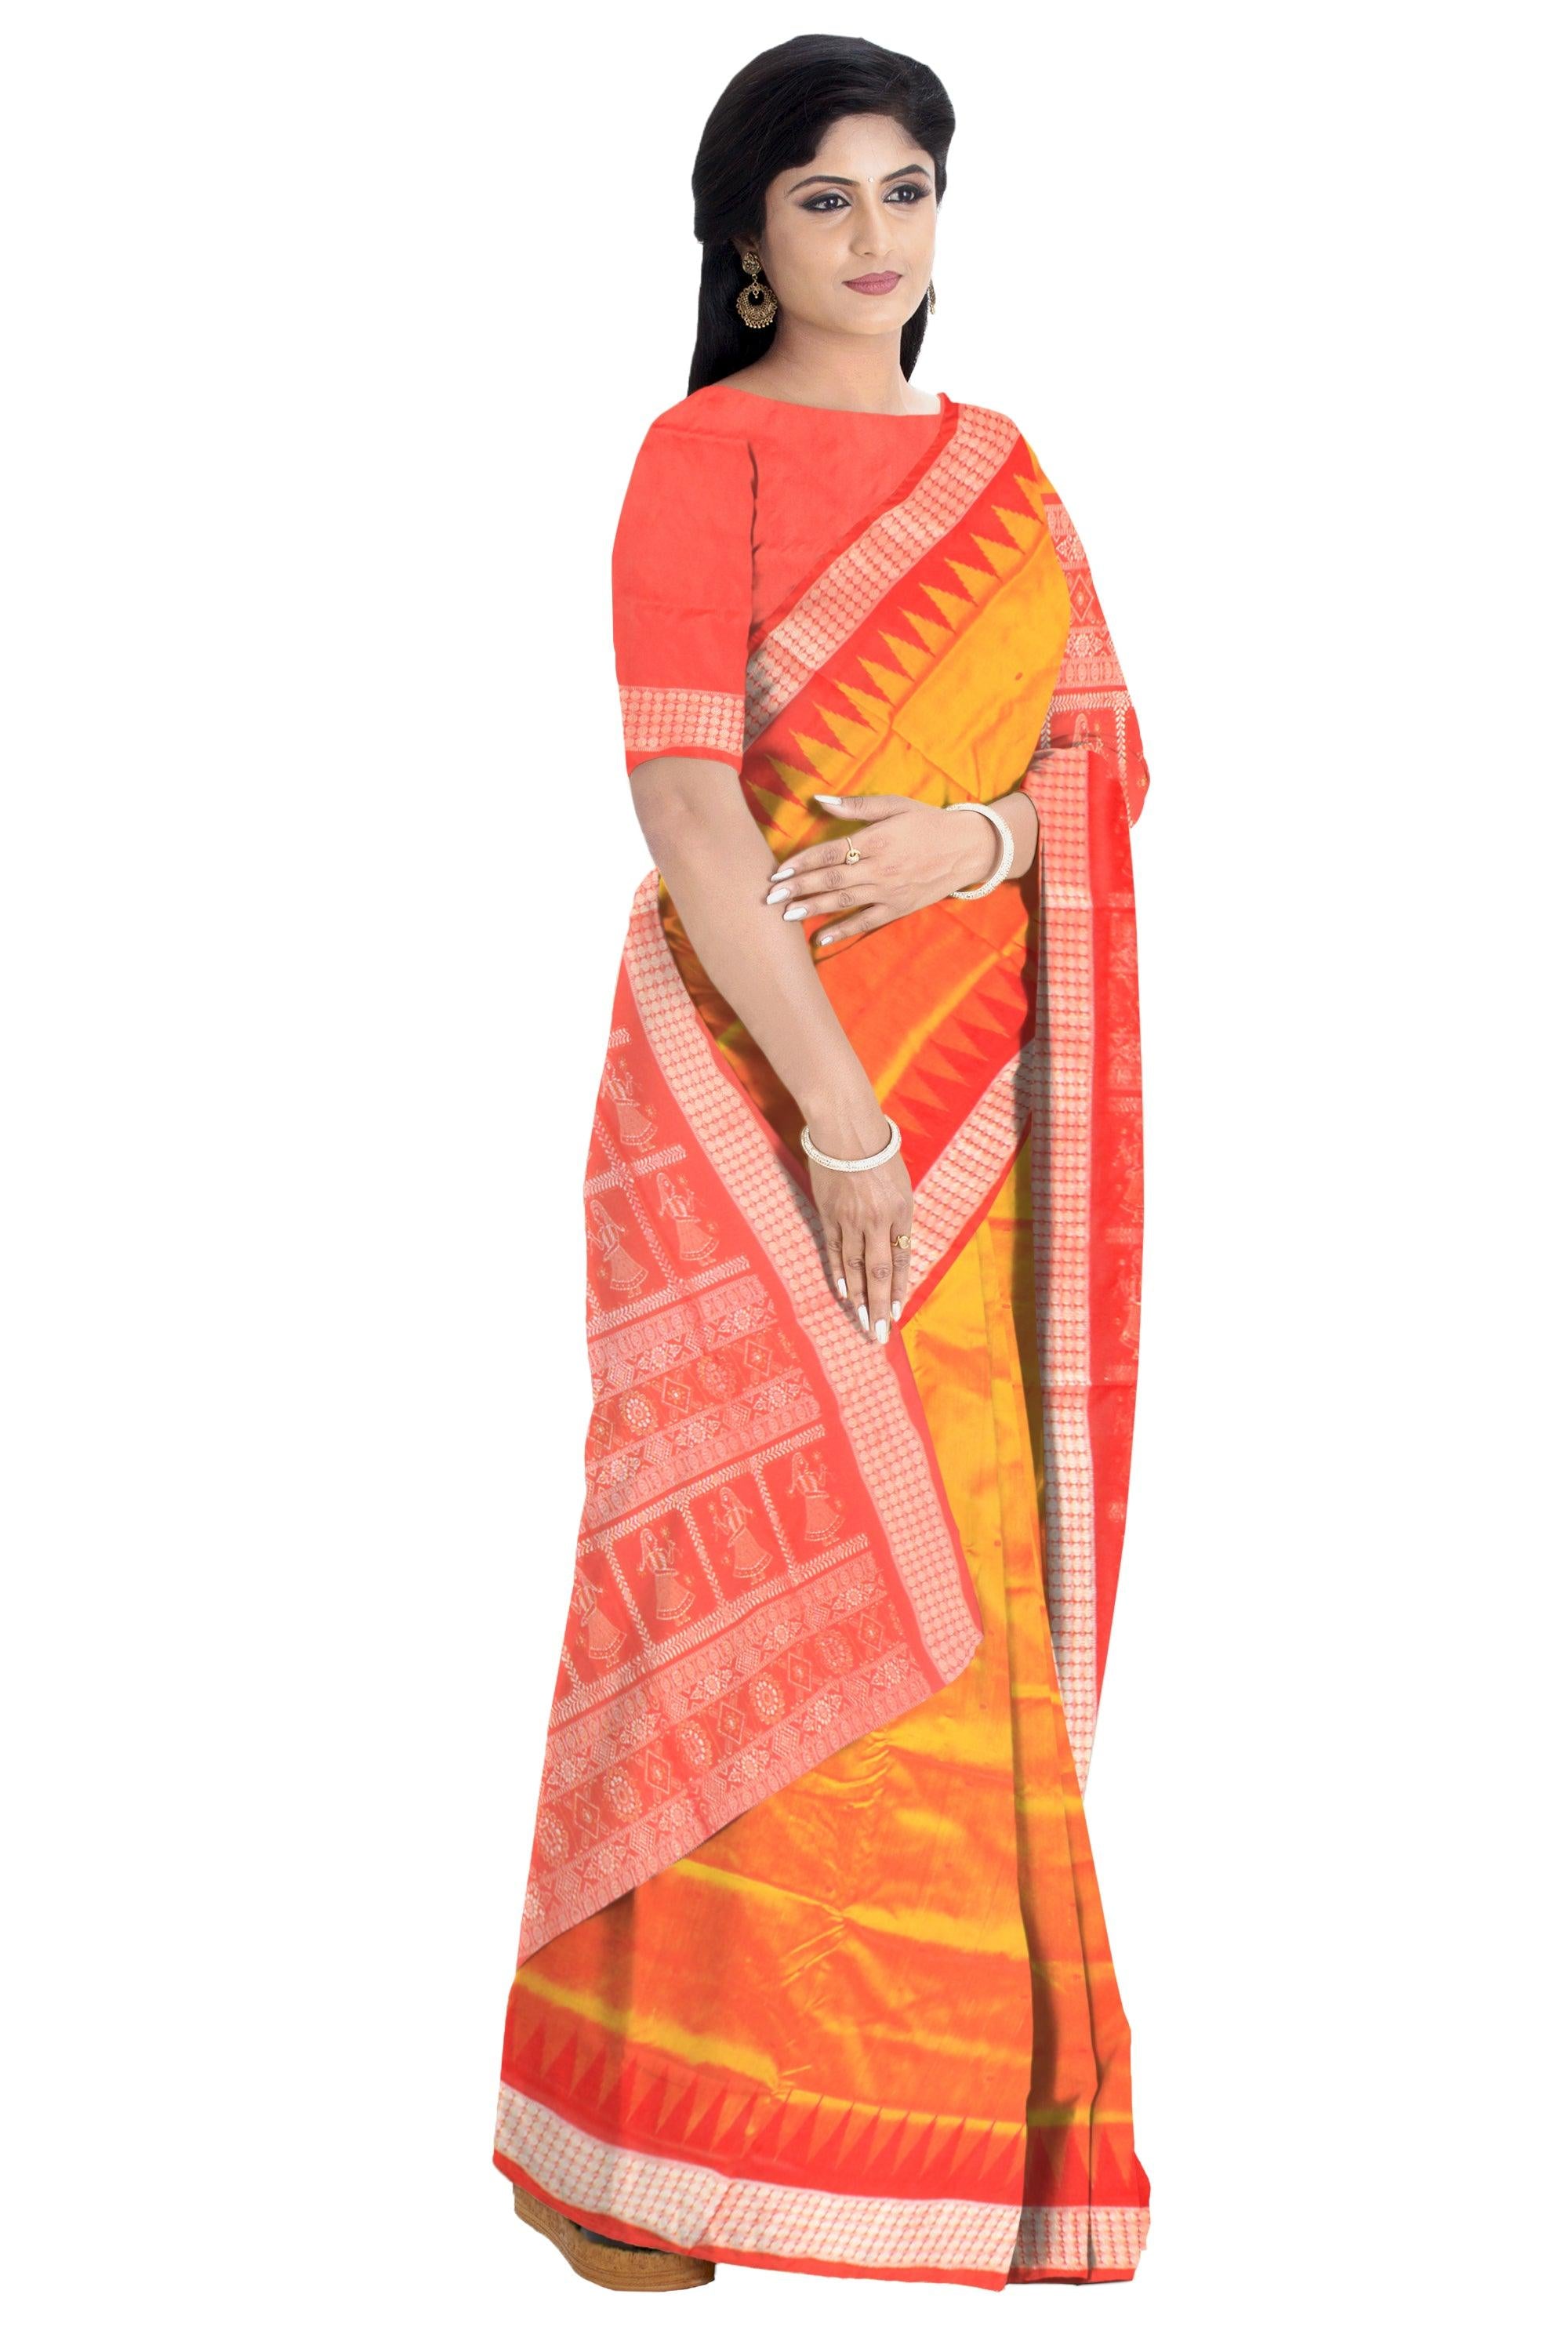 Sambalpuri Pata Saree in Yellow  Color in booty design with Silver color Border with blouse piece. - Koshali Arts & Crafts Enterprise